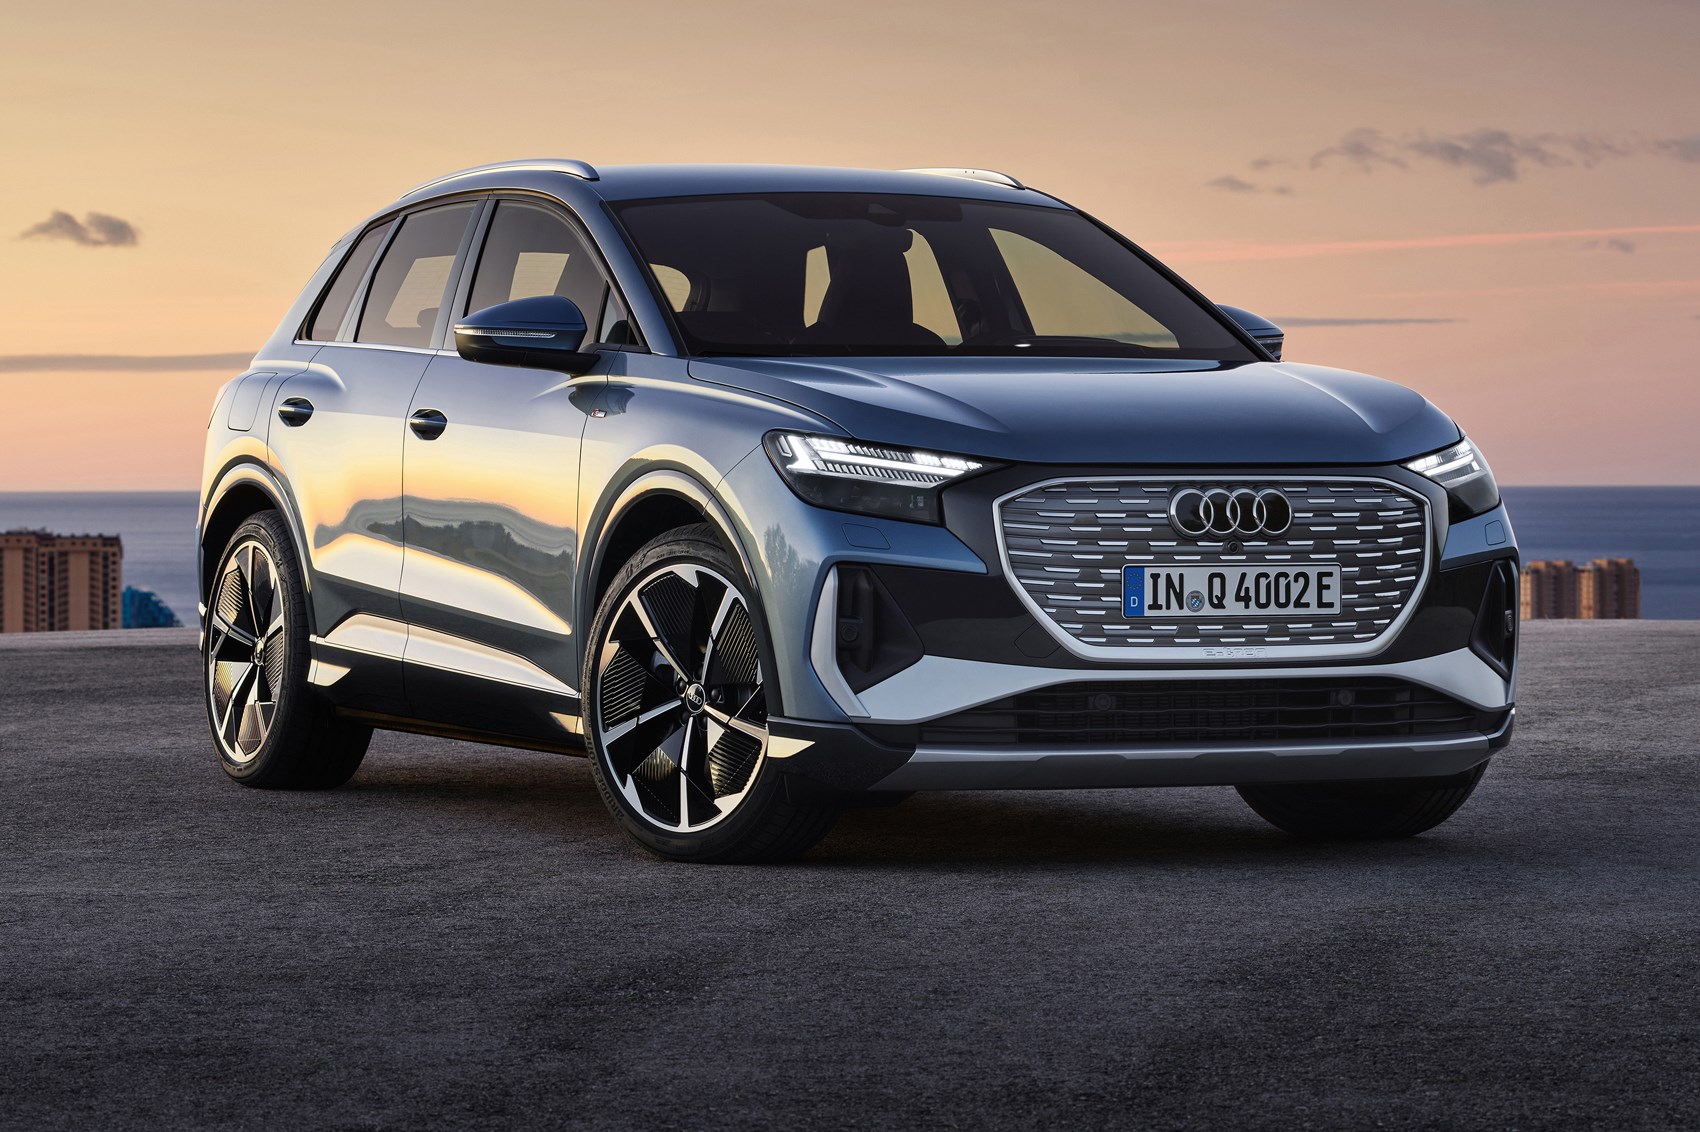 New Audi Q4 e-tron Coming Soon: Specs, price and release info